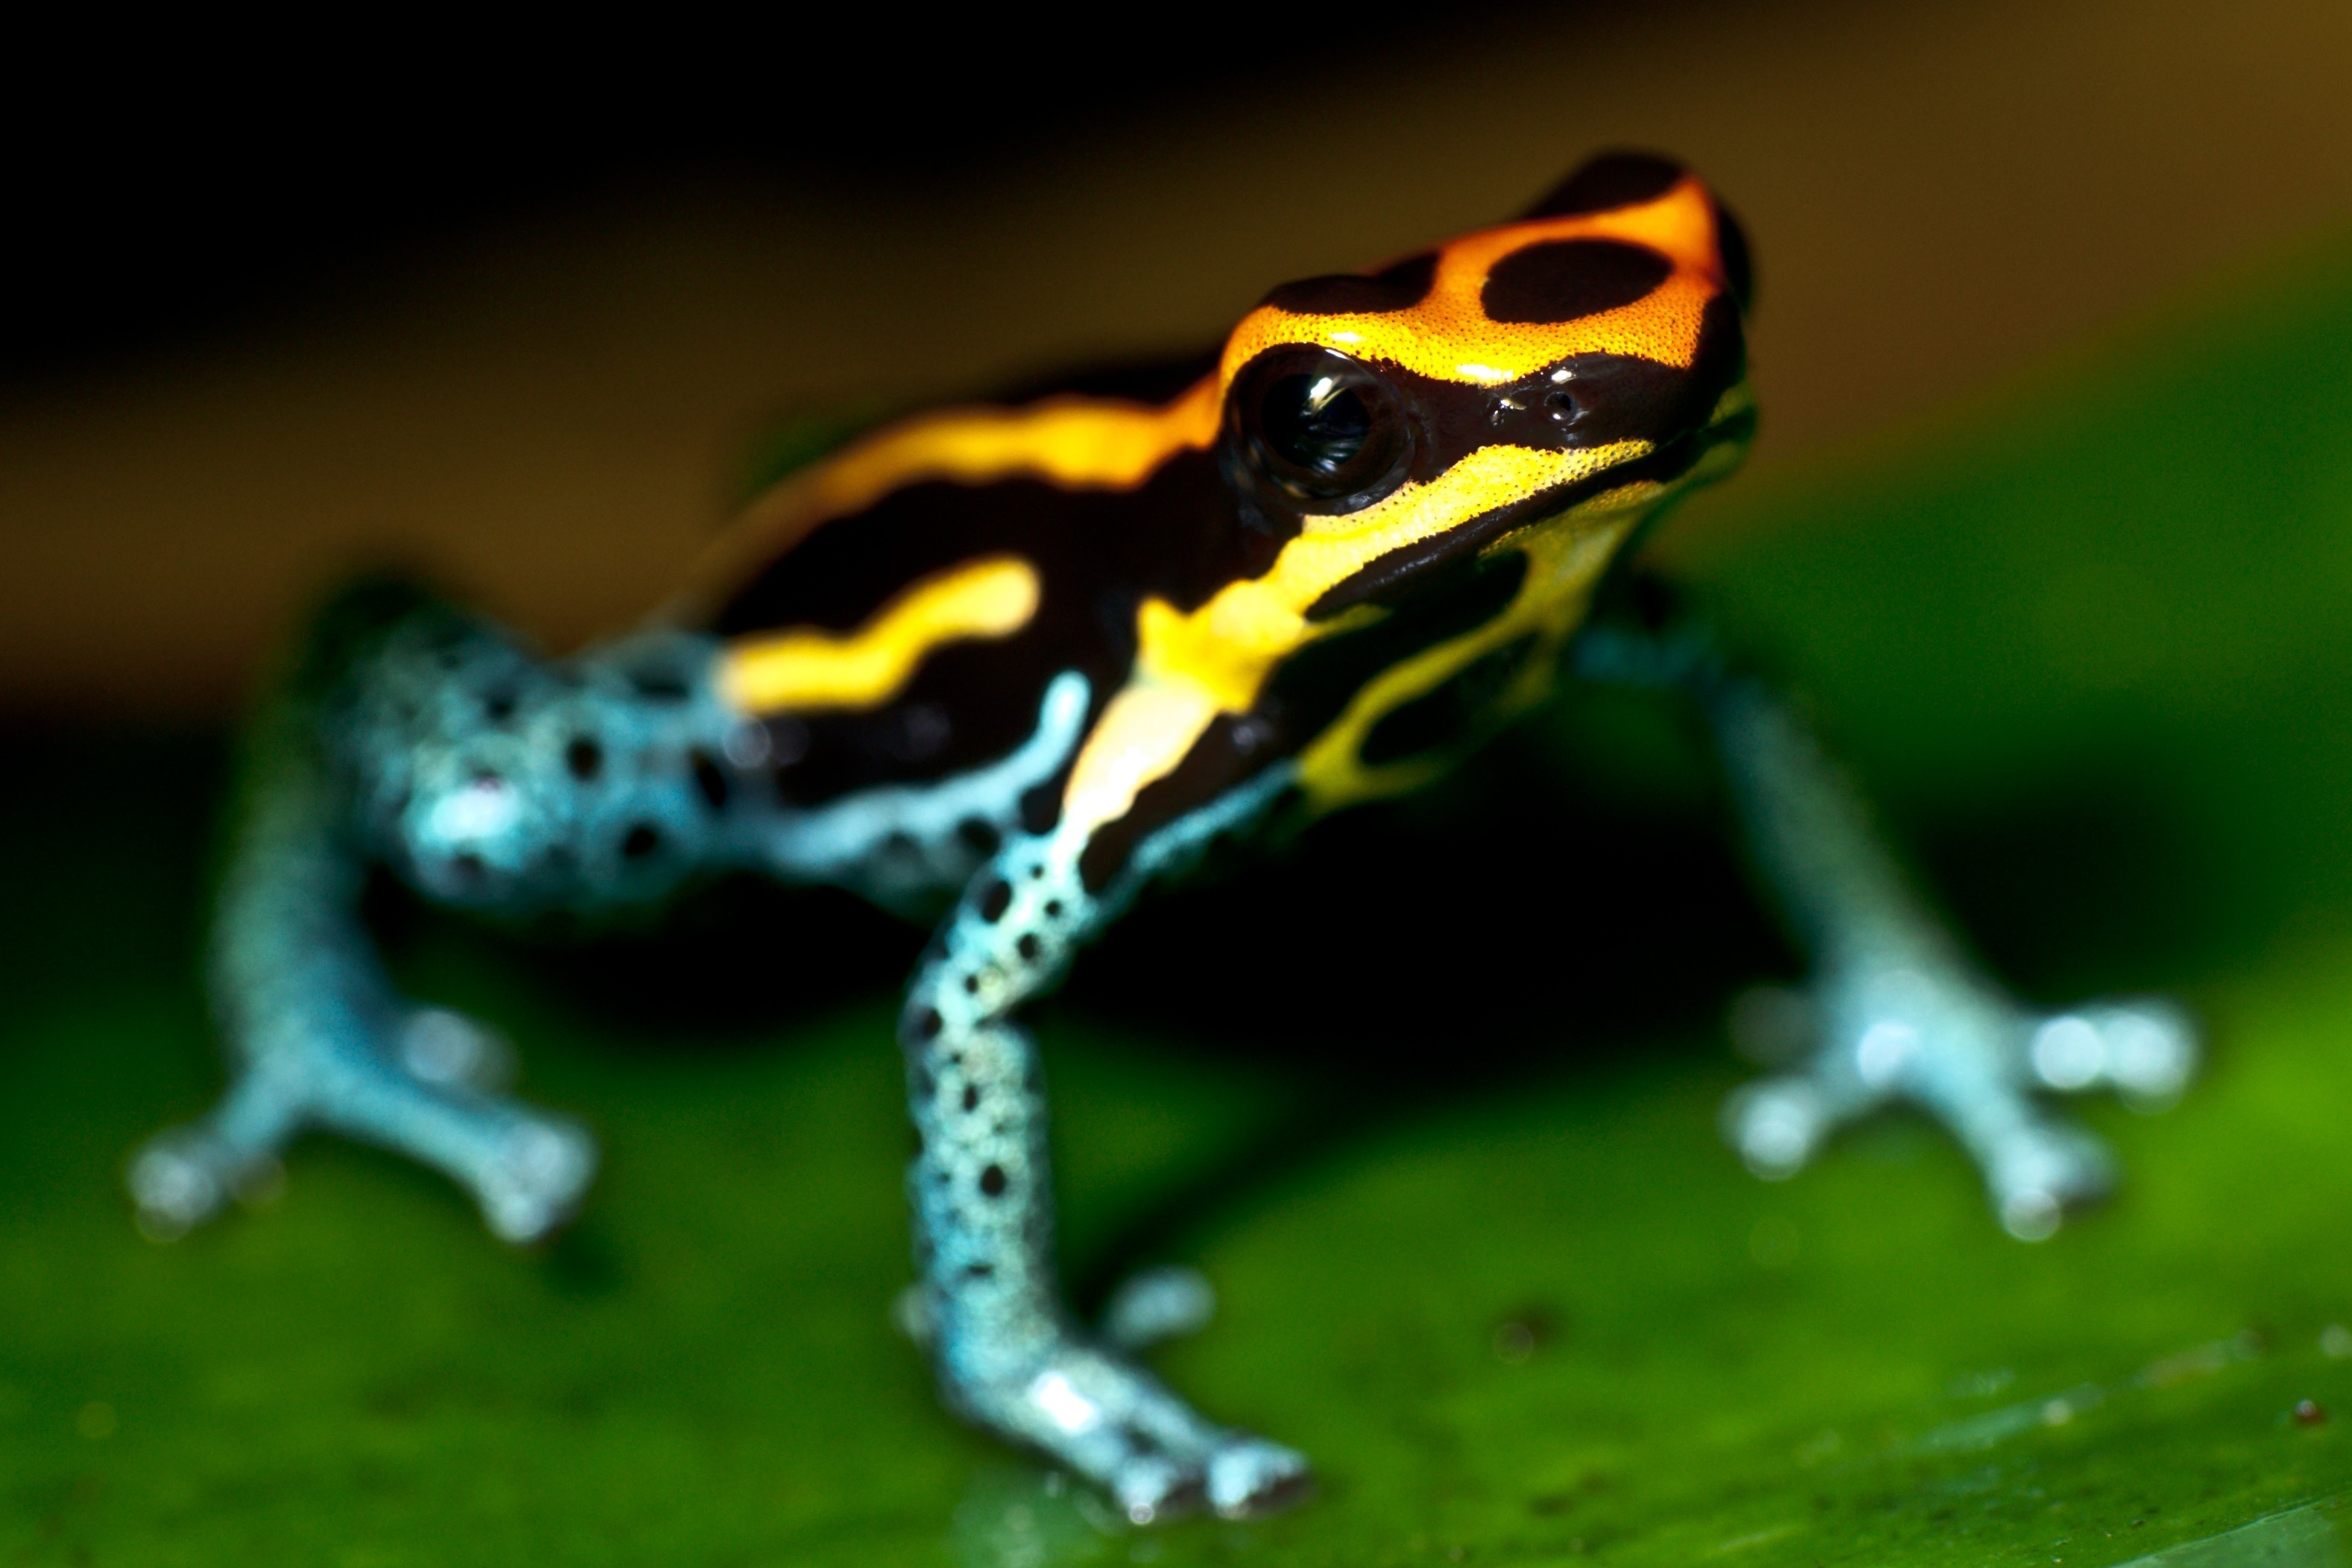 Explore More Wallpapers in the Poison dart frog Subcategory